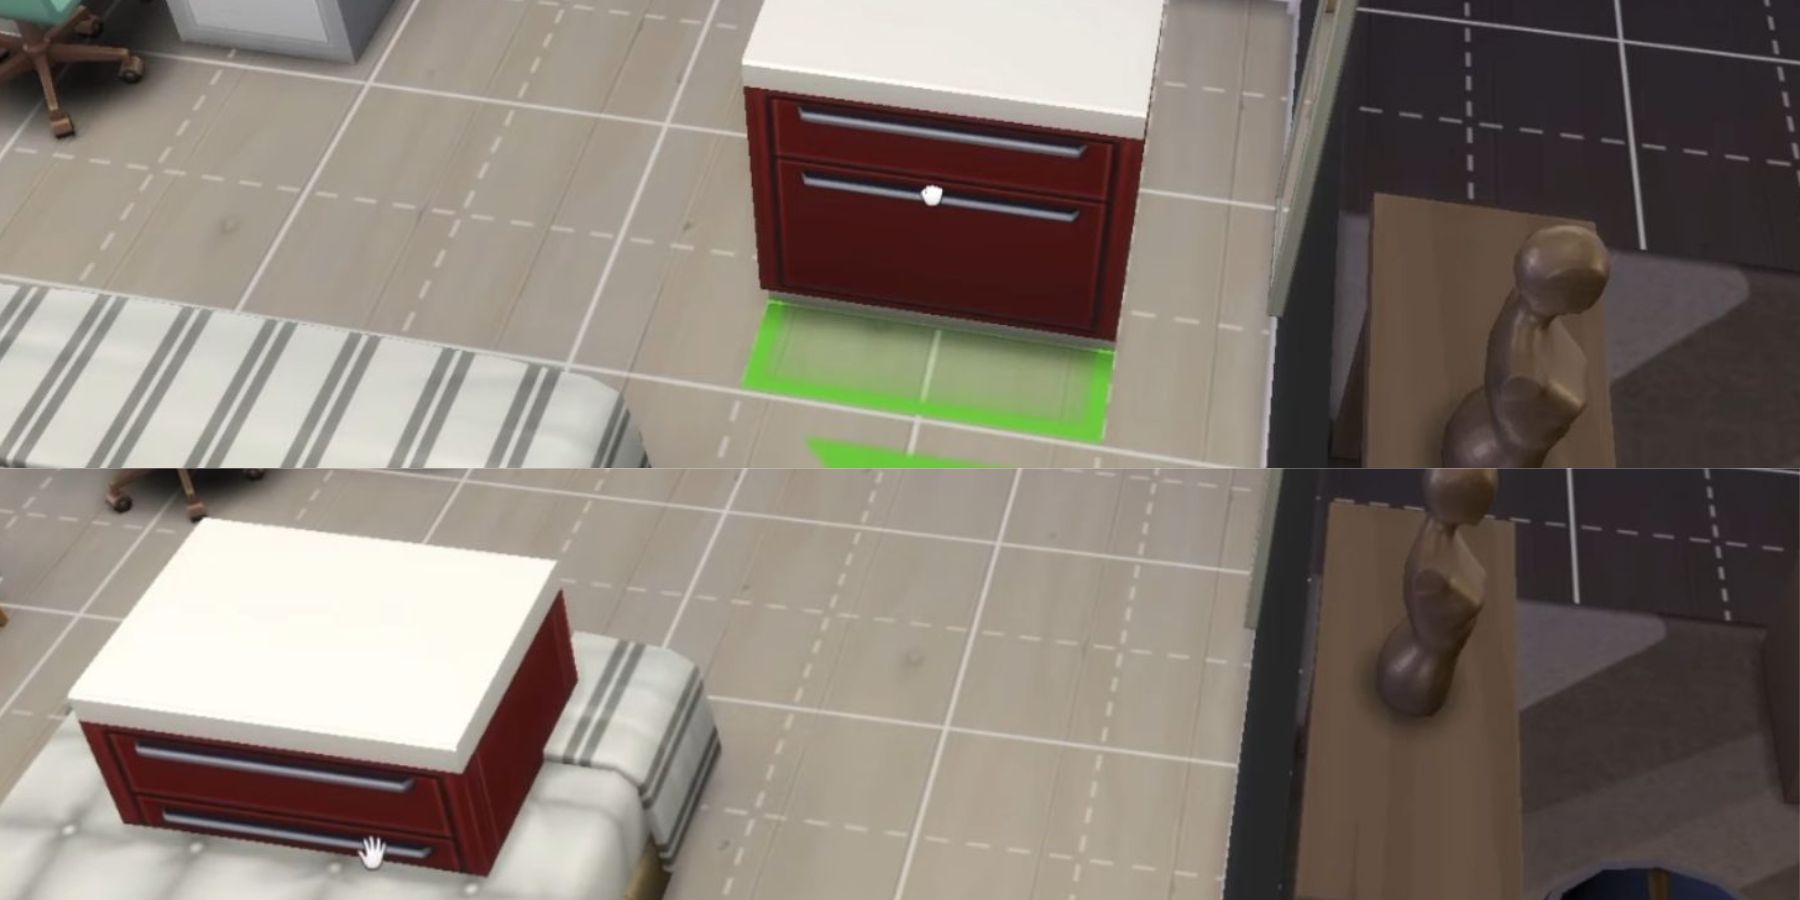 Mod The Sims - MoveObjects on Cheat